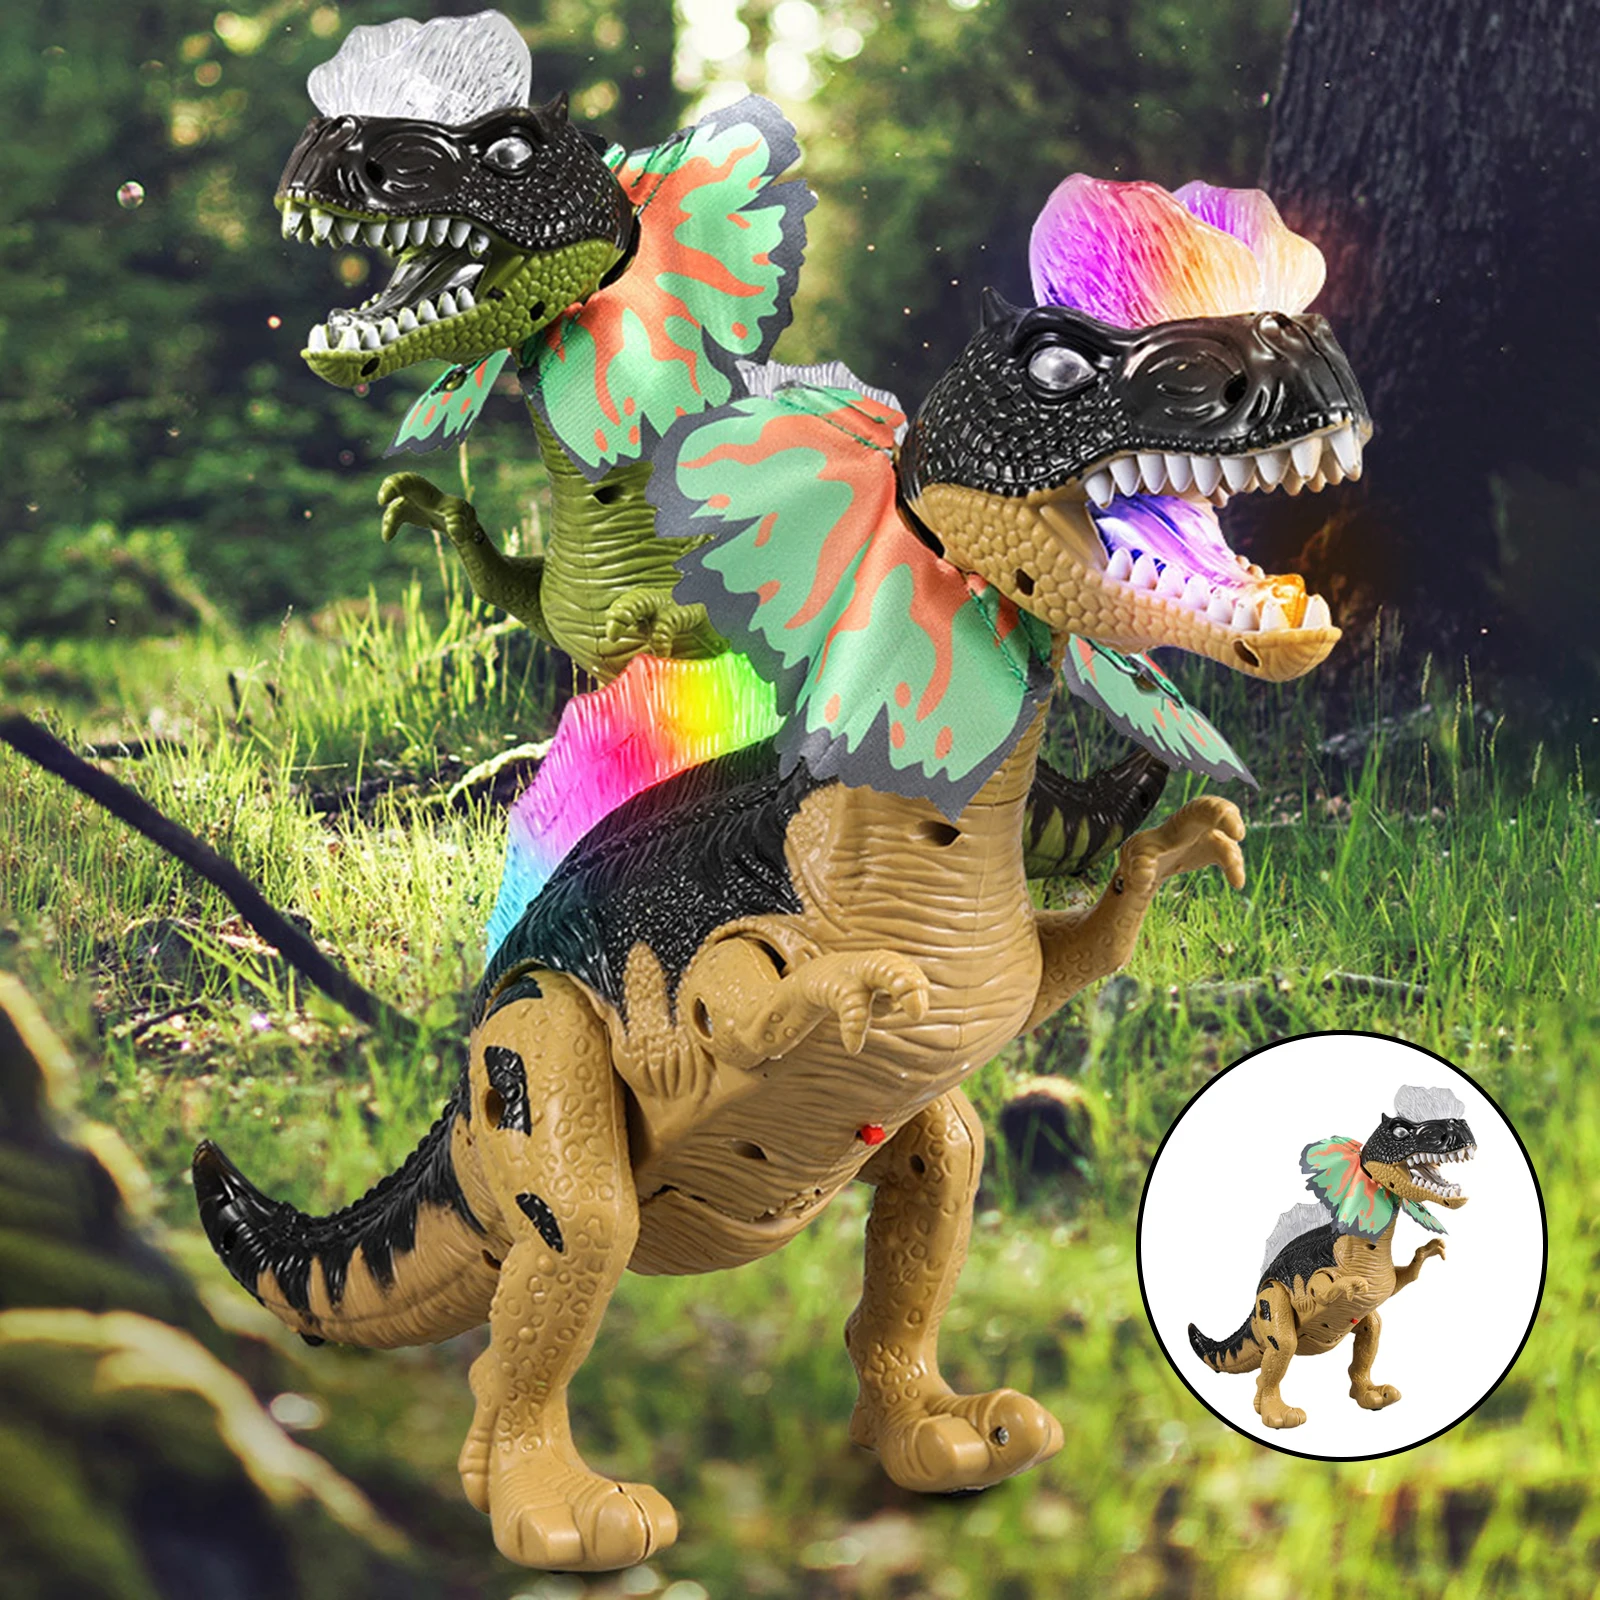 ABS Electronic Walking Dinosaur Walking Roaring Battery Powered Supplies Attractive Model Double Crested Dinosaur for Boys Child